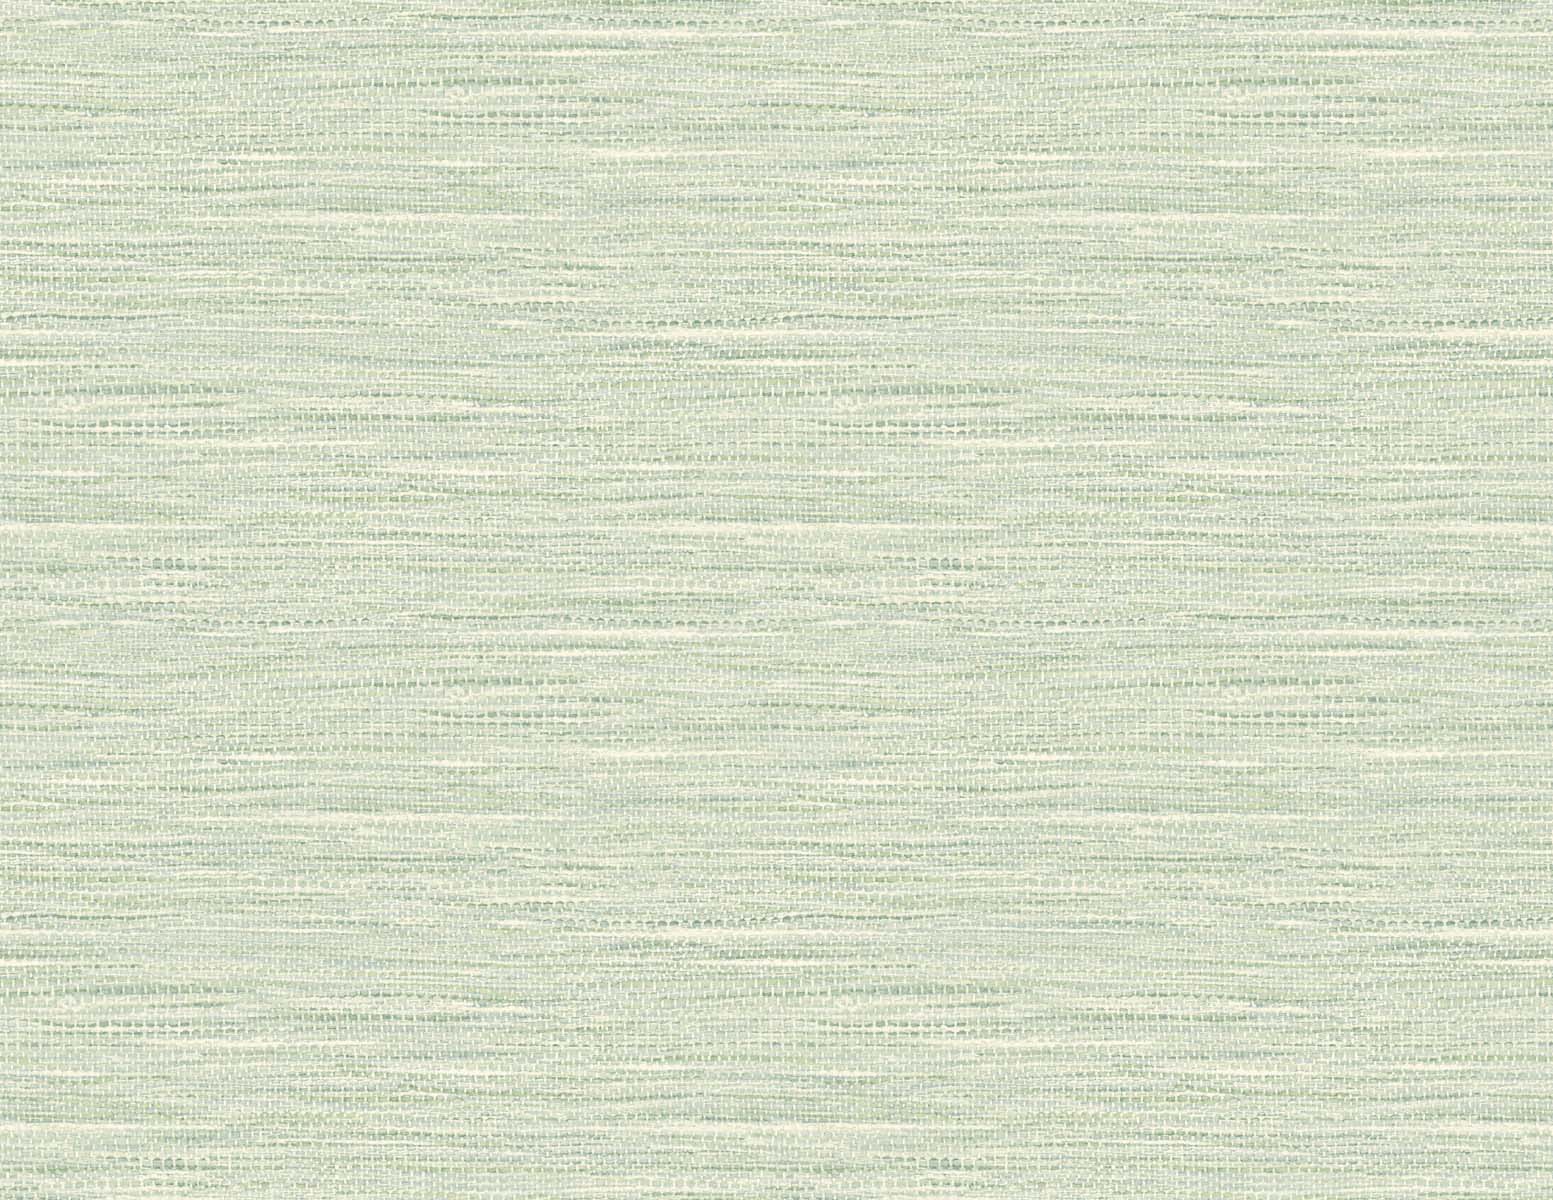 DuPont TG60408 Tedlar Textures Braided Faux Jute Embossed Vinyl  Wallpaper Airy Forest